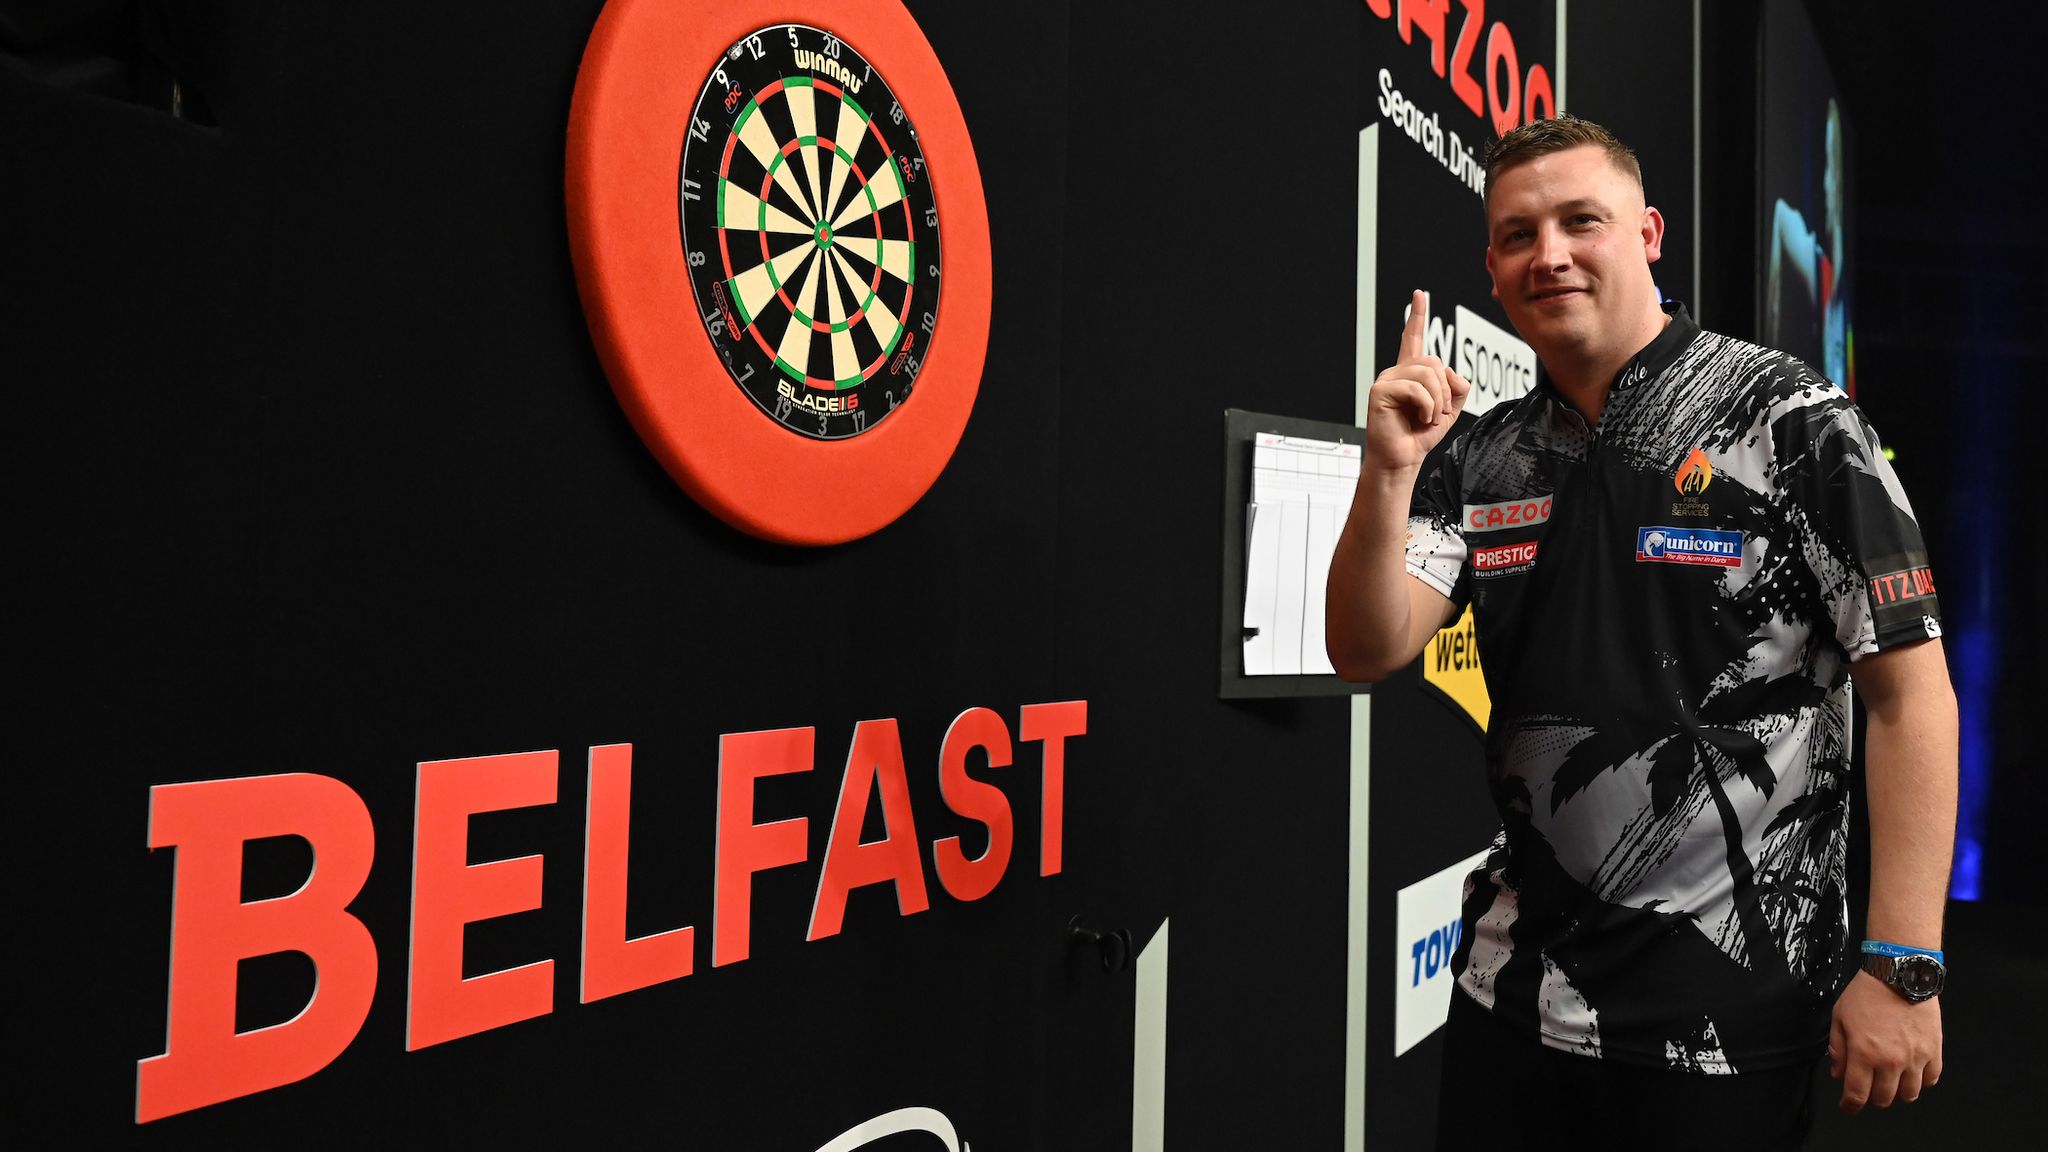 Premier Darts: Chris Dobey is on cloud nine victory in Belfast but he also has Wembley on his mind | Darts News | Sky Sports